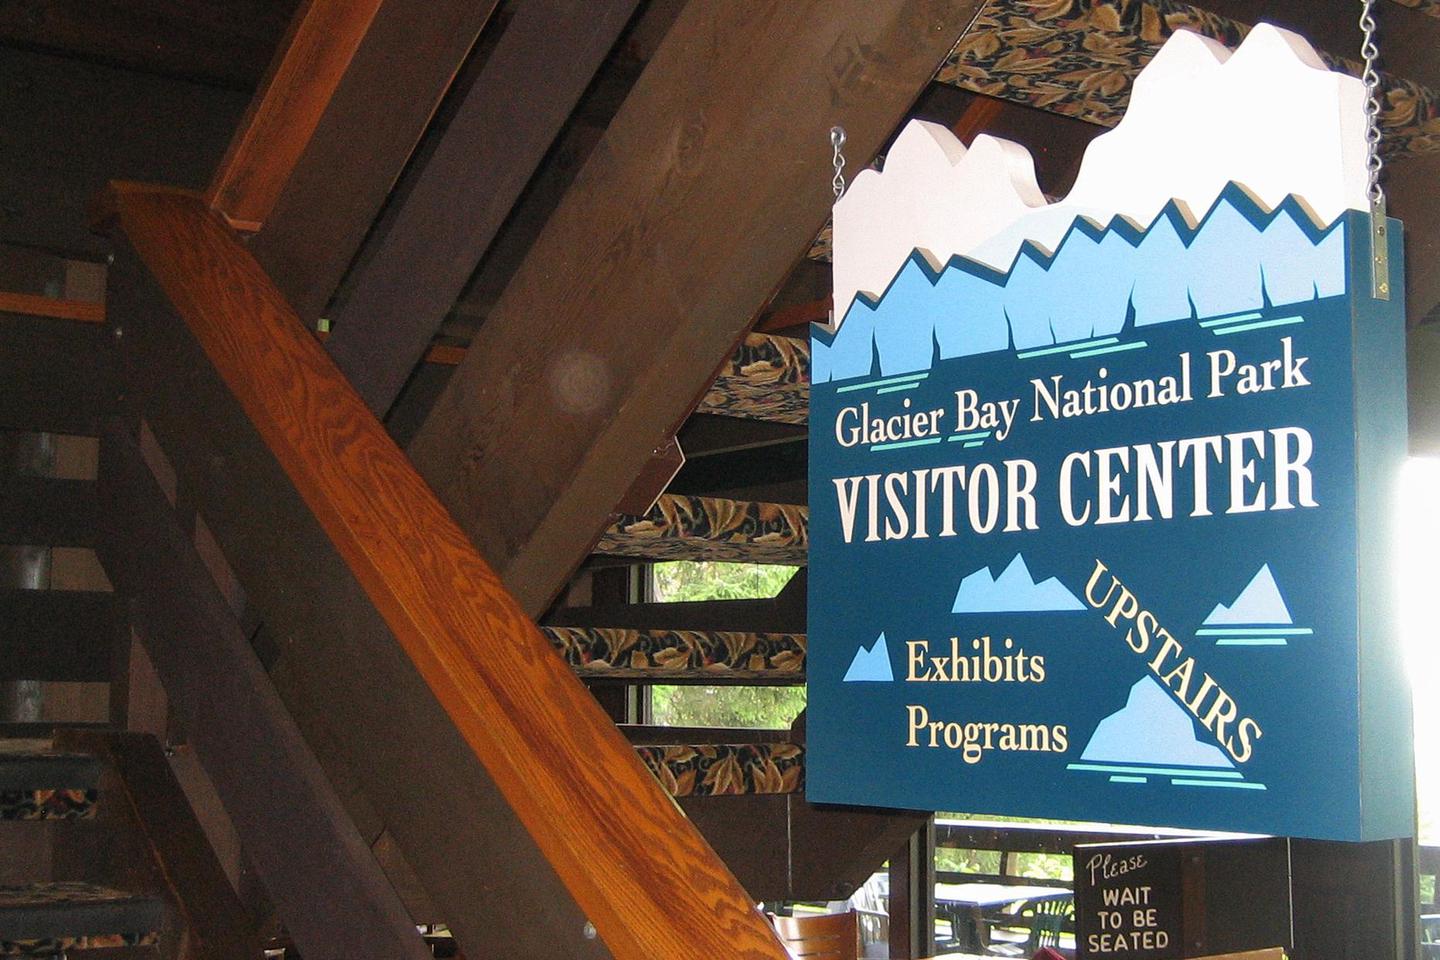 Glacier Bay Lodge Upstairs Visitor Center SignHead upstairs after you enter the Glacier Bay Lodge to find the Visitor Center.